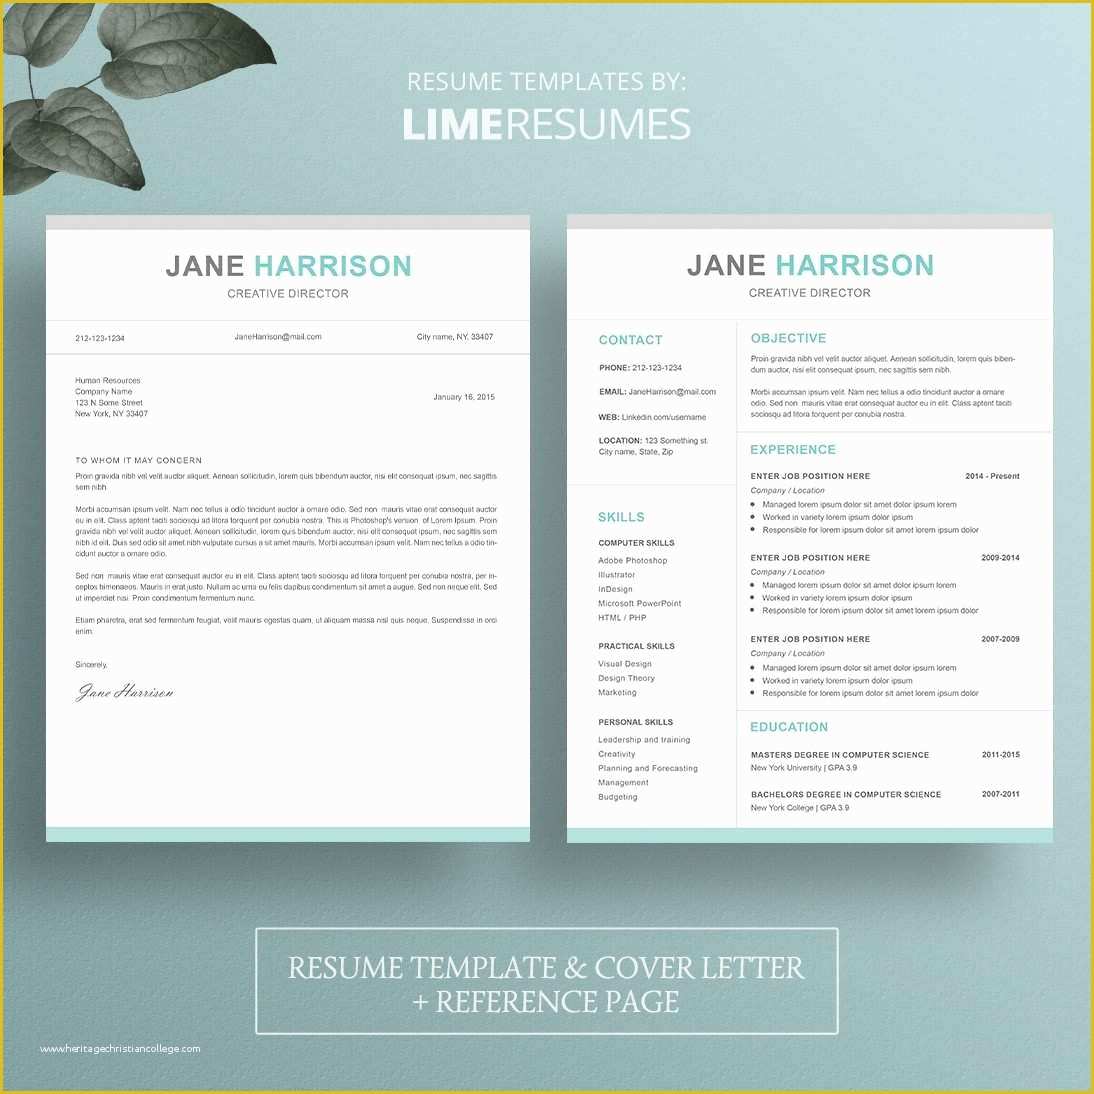 Creative Resume Templates Free Download for Microsoft Word Of Creative Resume Templates Free Download for Microsoft Word